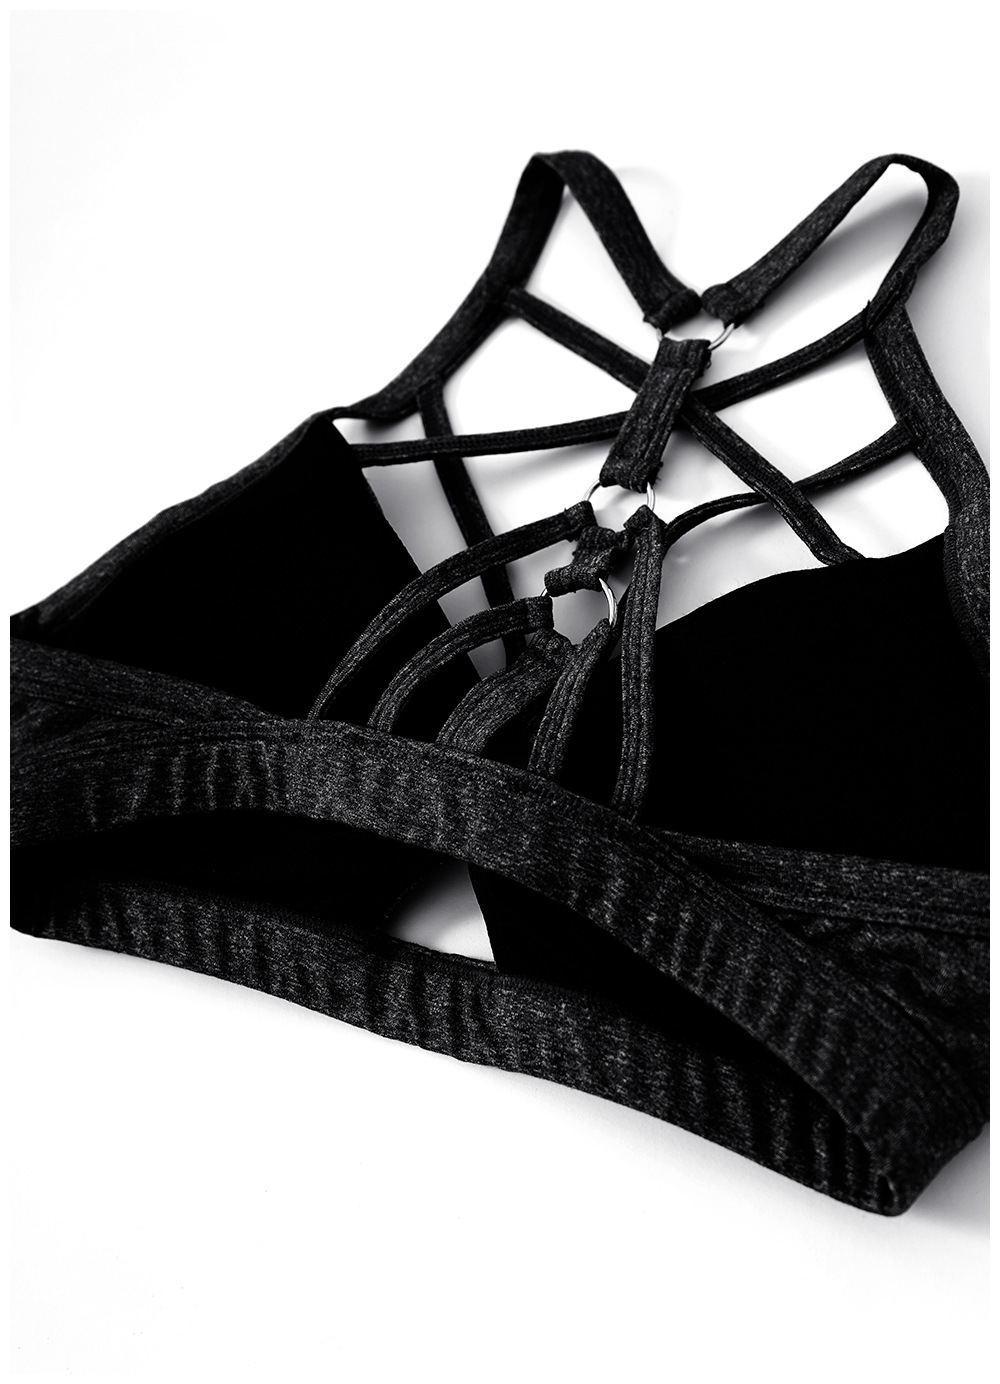 ZYZSTR Women Underwear Sports Yoga Lace Top Bra Cut Out Mesh Gym Sport  Workout High Elasticity Shockproof Tank Tops (Color : Black, Size : Small)  : : Clothing, Shoes & Accessories